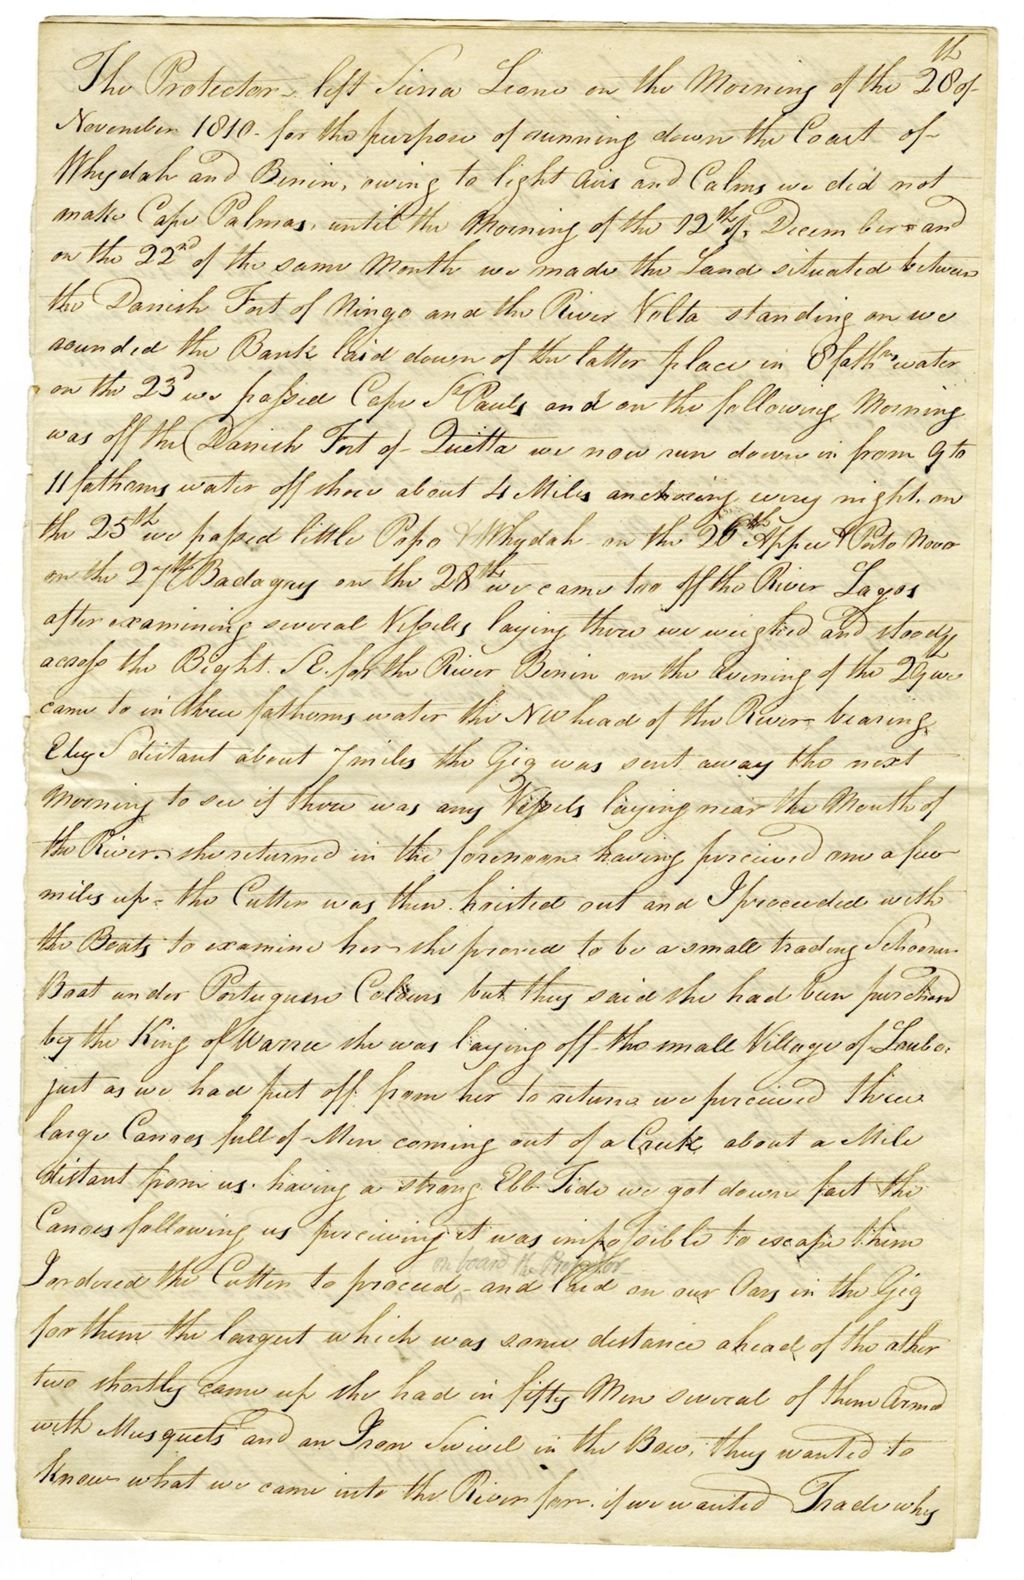 Report of a cruise to Whydah and Benin, 1811